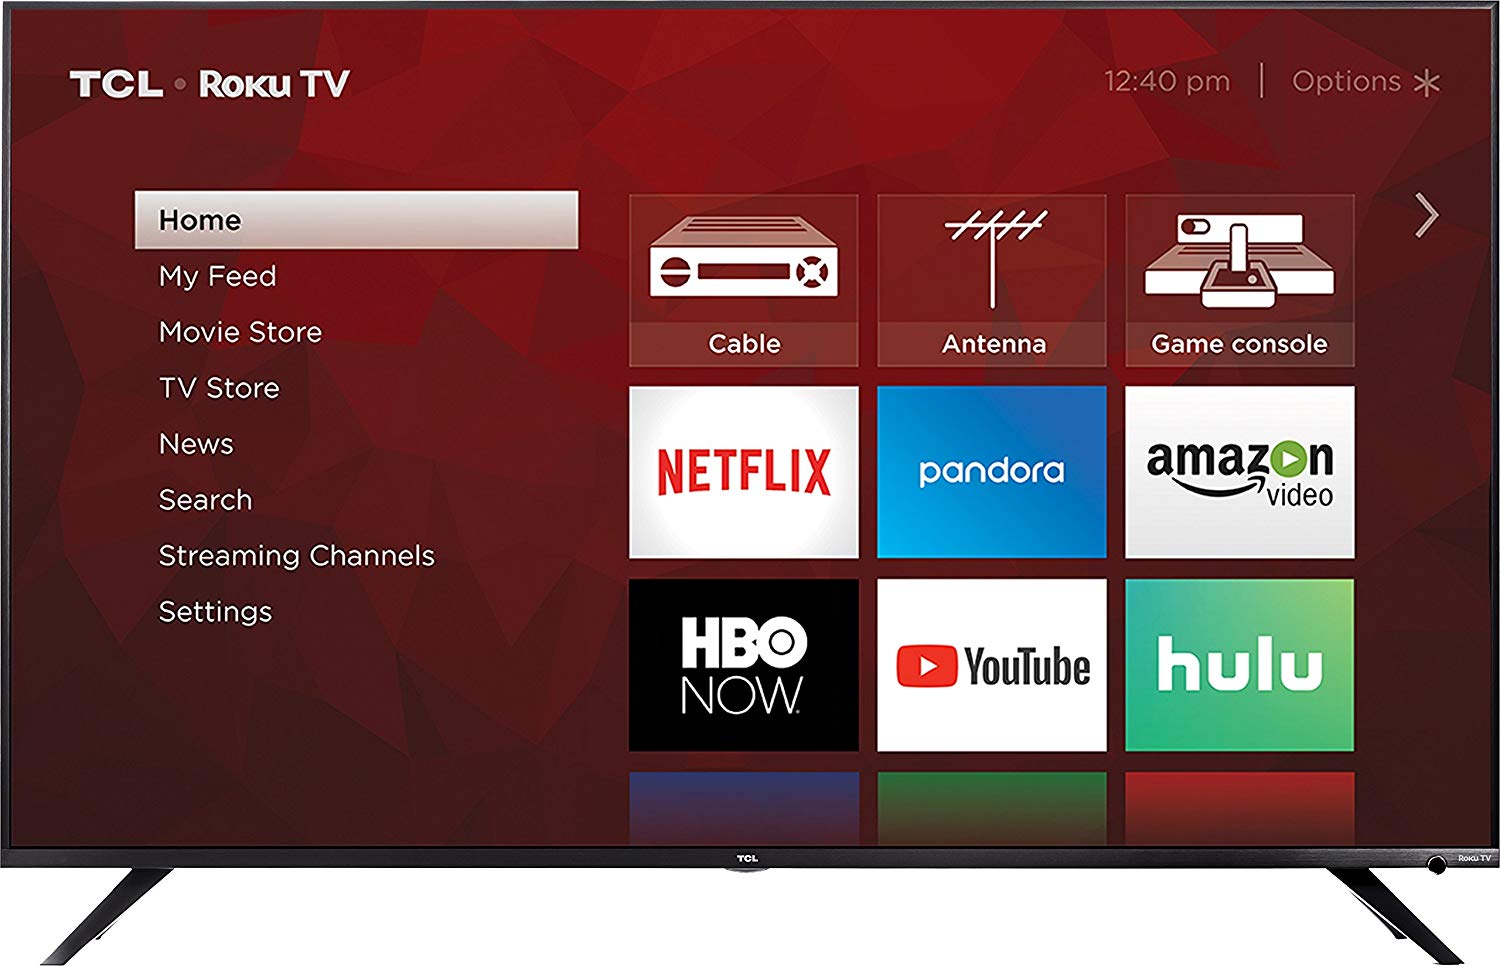 Roku TVs Are Now Sold By 9 Different TV Manufacturers